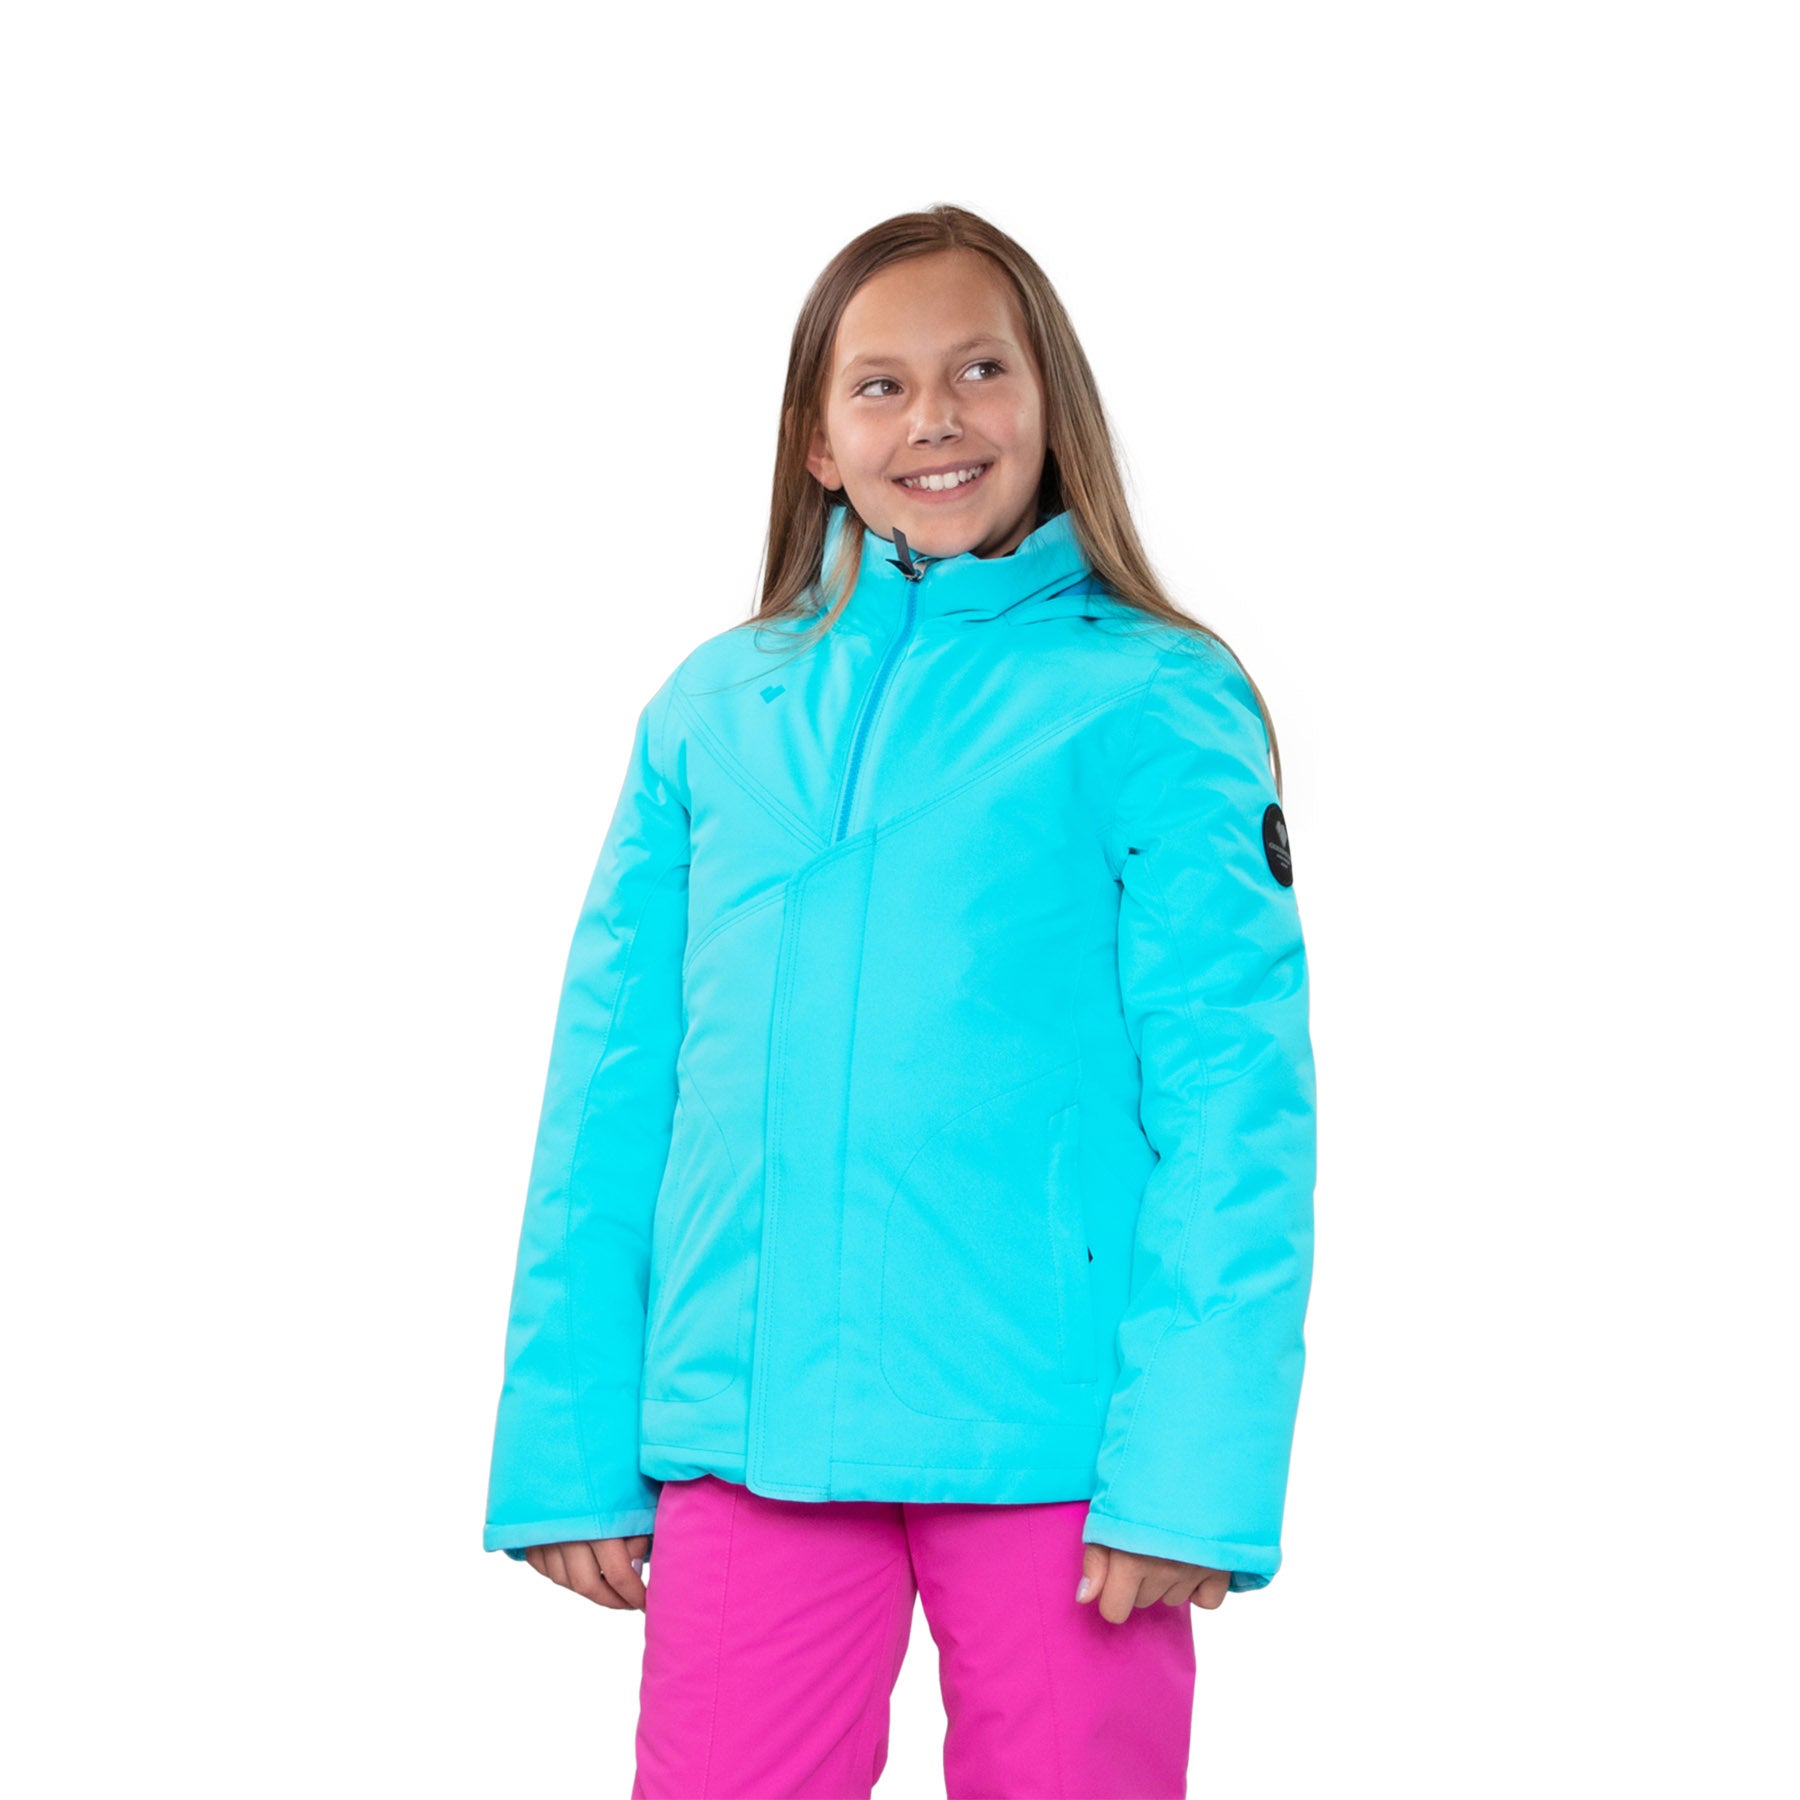 Image features a female model wearing the Obermeyer girls Rylee Jacket in Colorado Sky blue with bright pink ski pants.